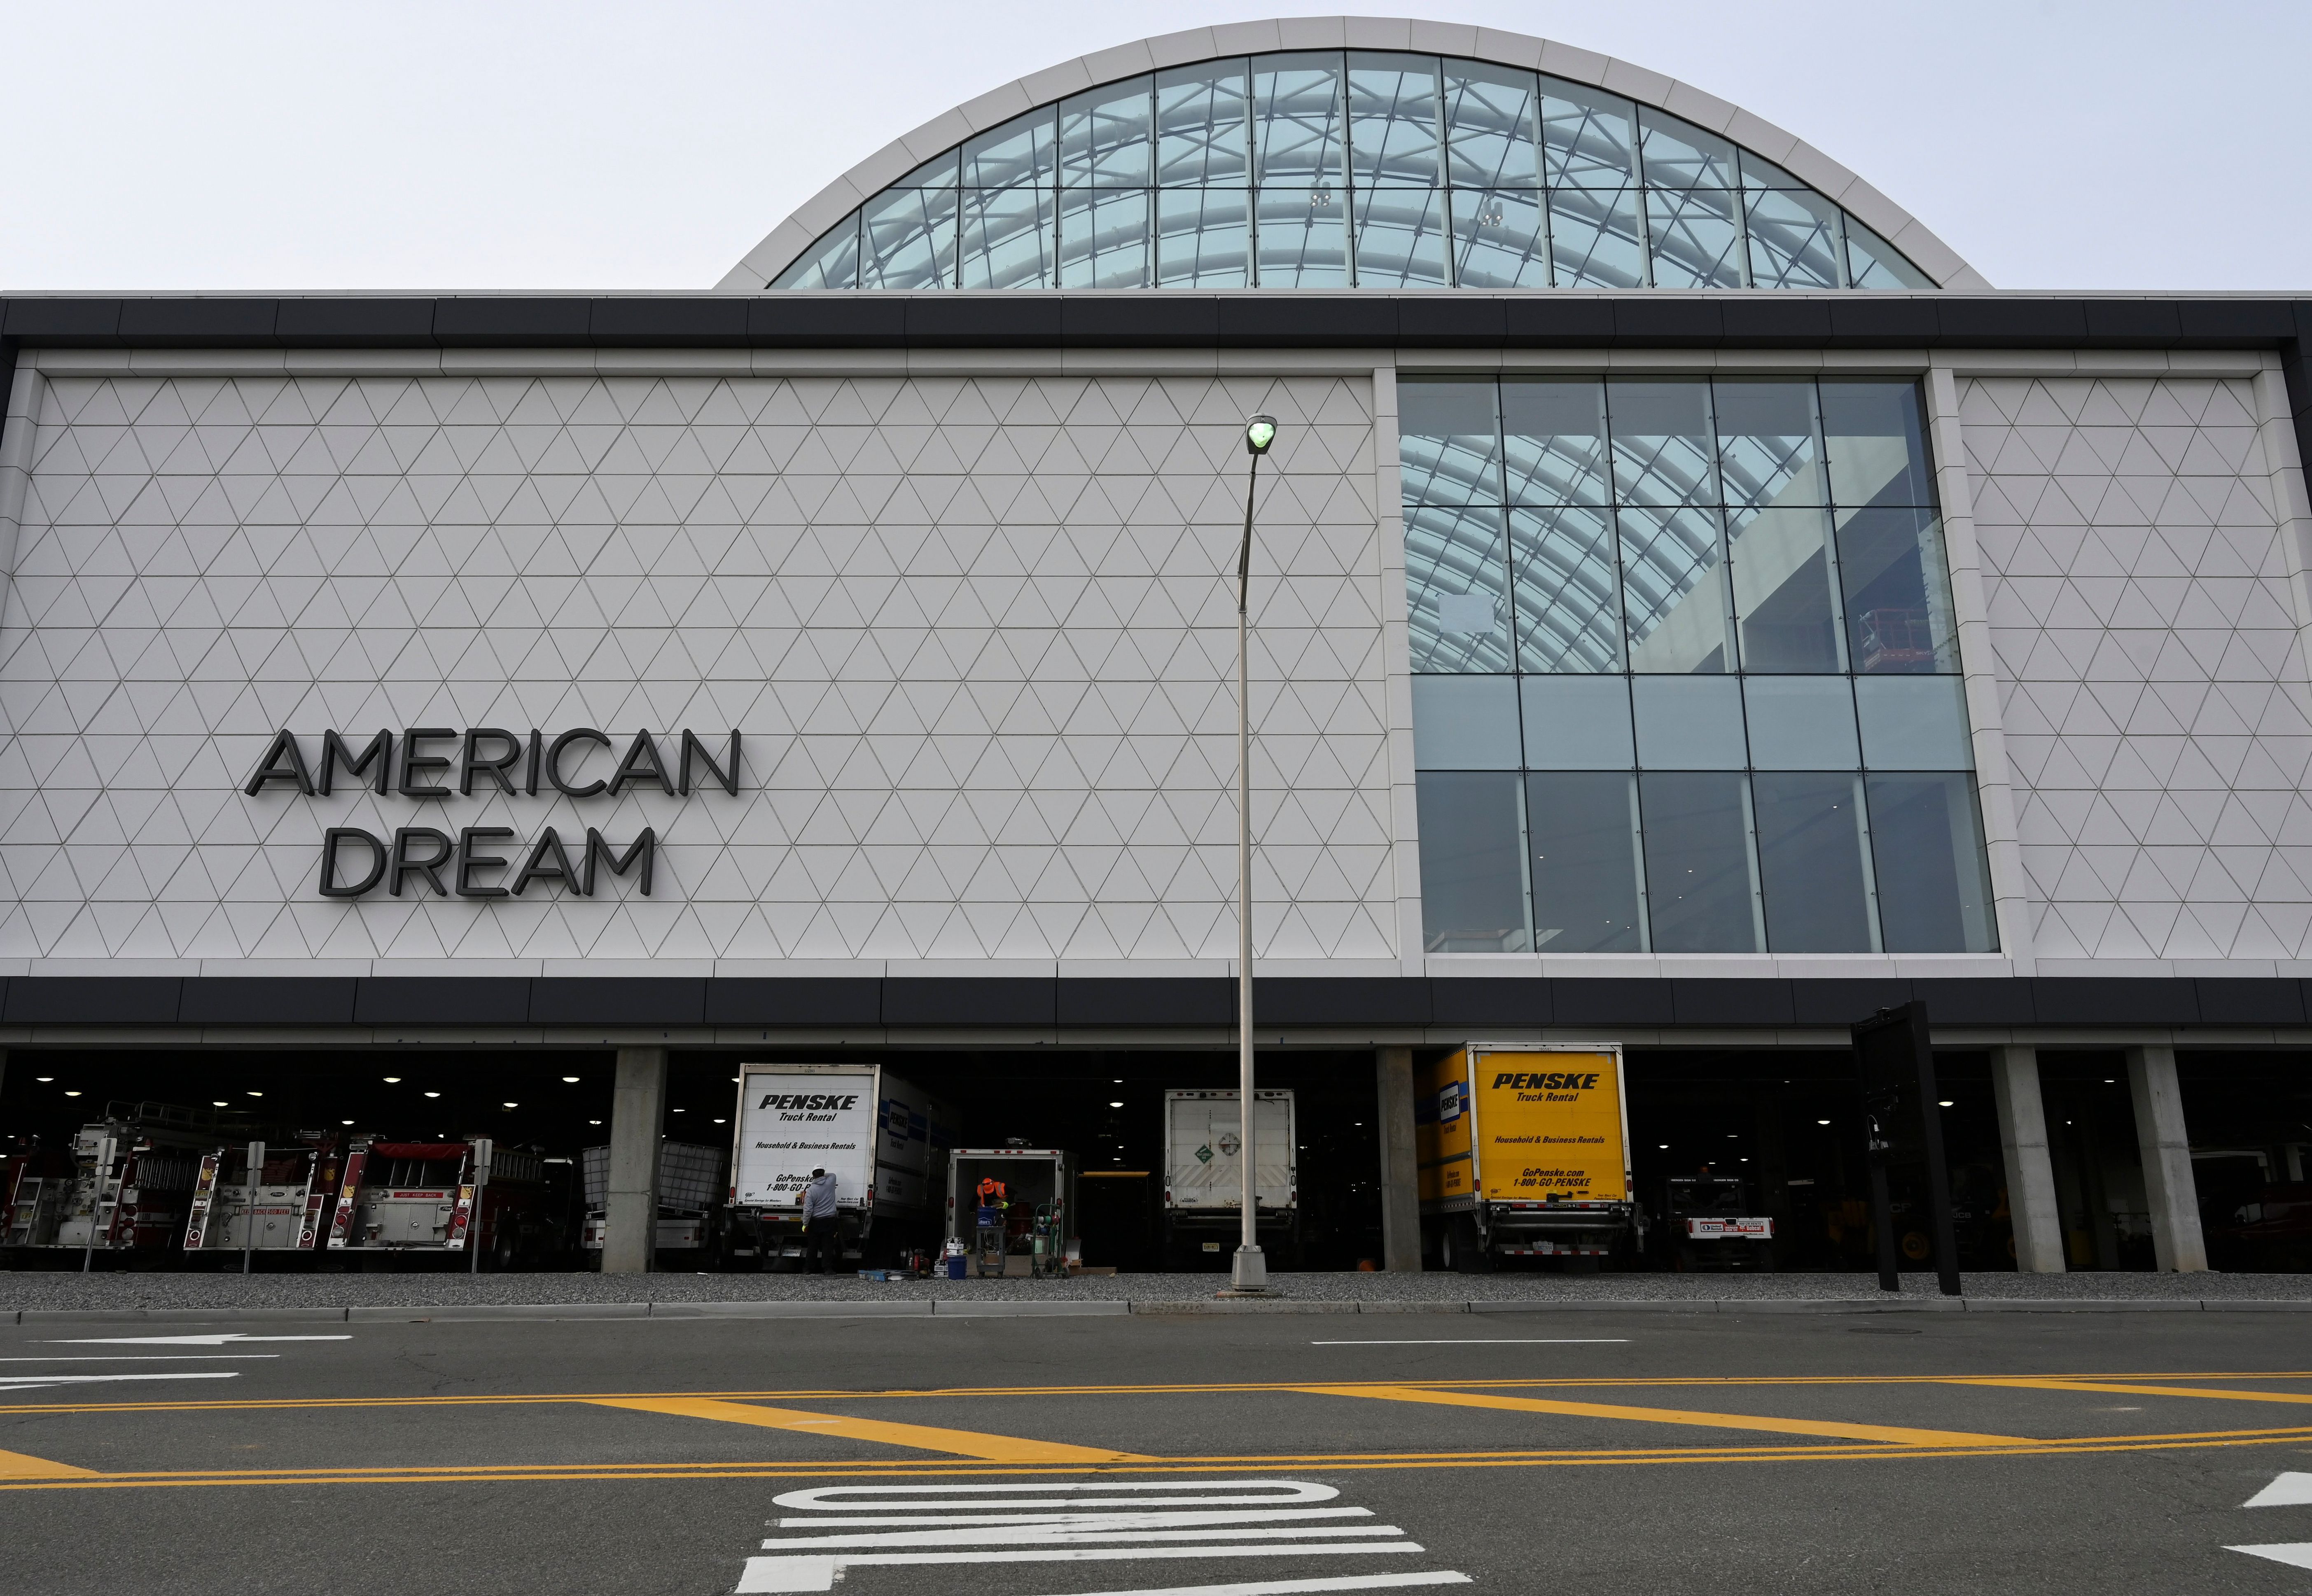 American Dream Mall: What Stores and Restaurants Are Inside?